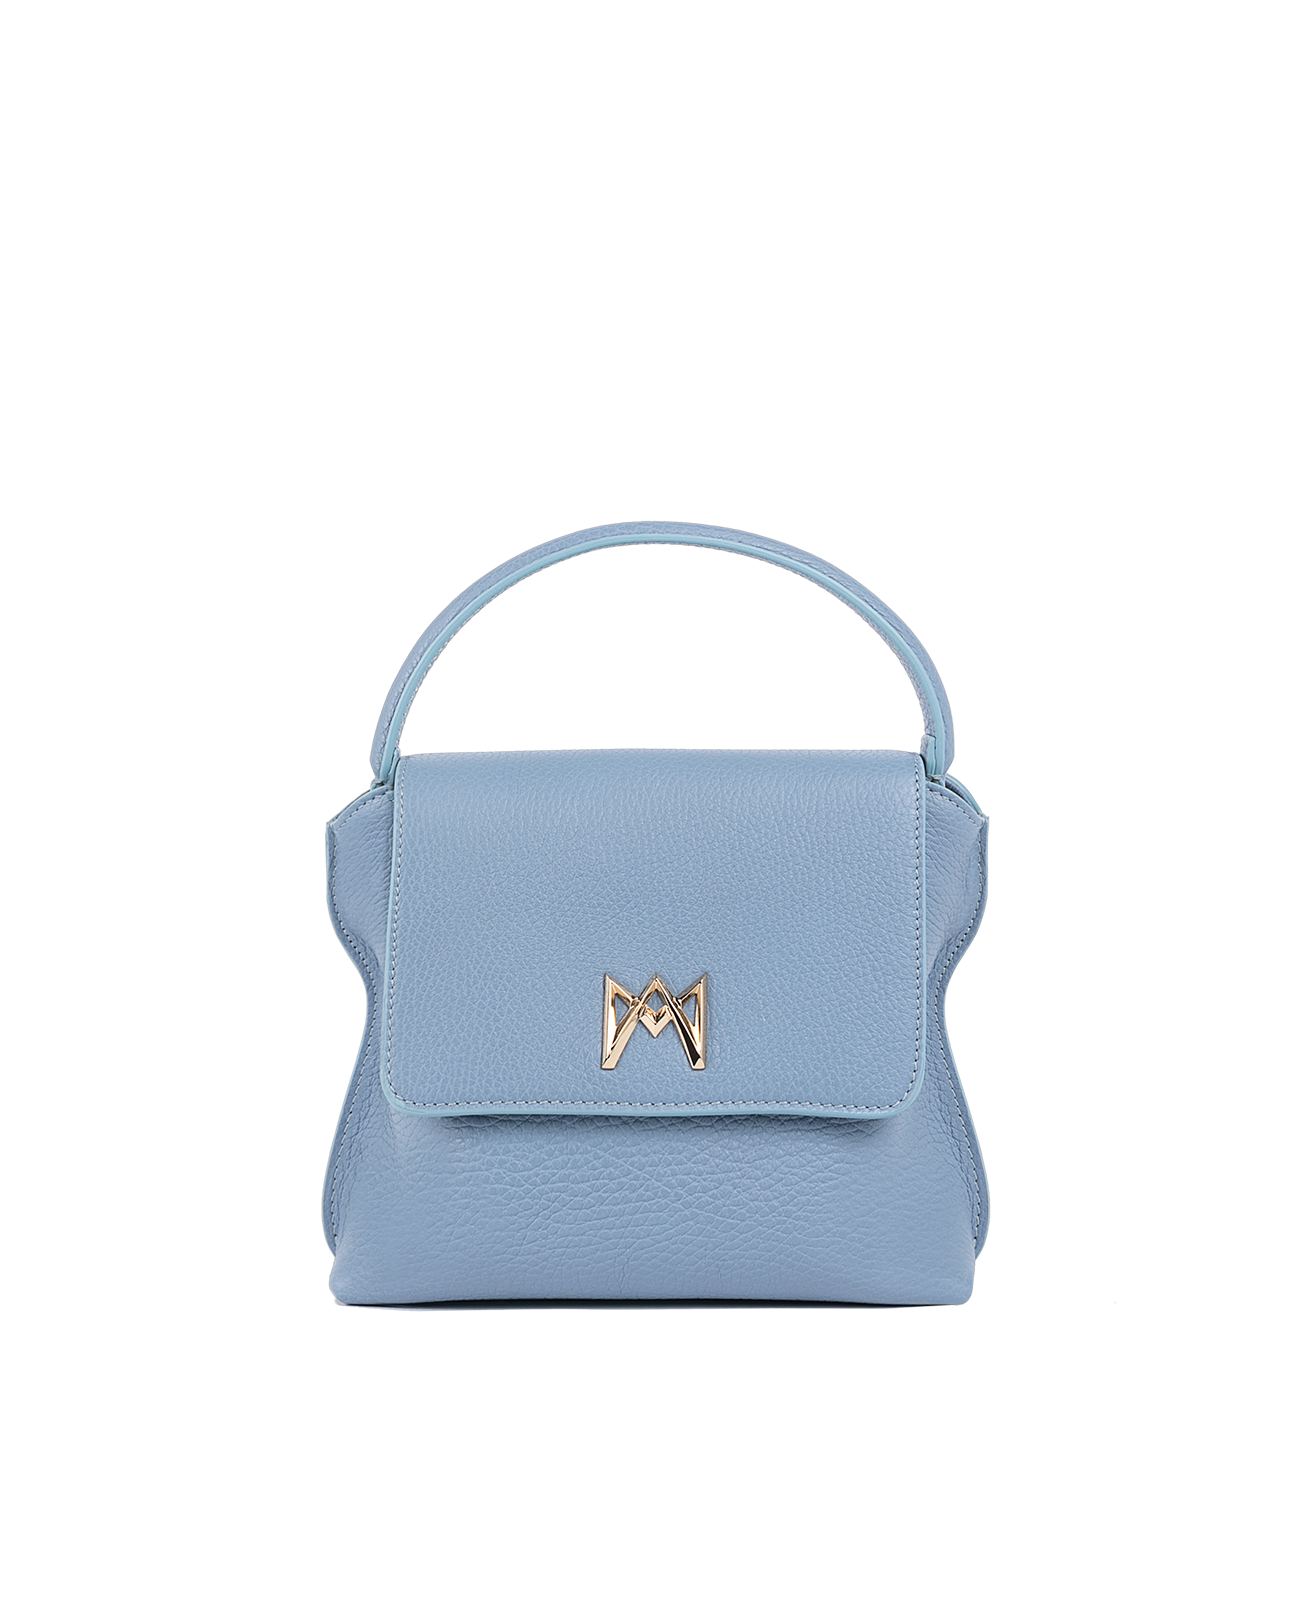 Cross-body bag in Italian full-grain leather, semi-aniline calf Italian leather with detachable shoulder strap.Three compartments, zip pocket in the back compartment. Magnetic flap closure with logo. Color: Baby Blue. Size:Medium